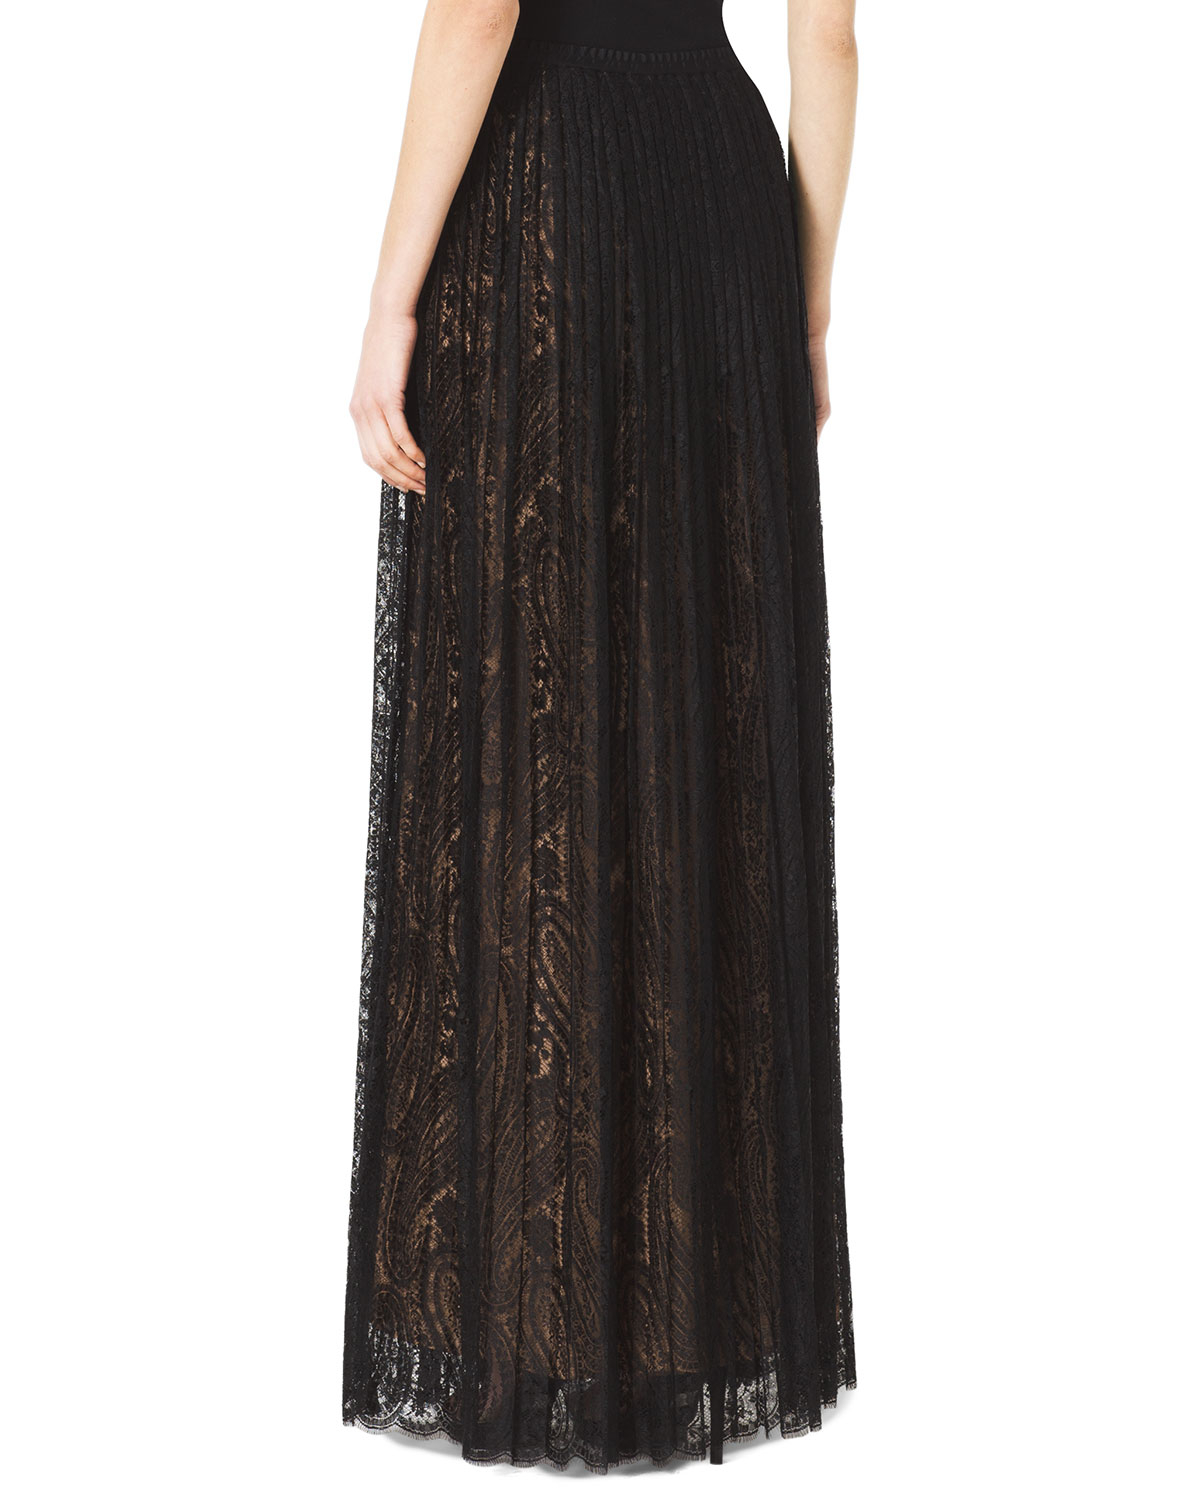 Lyst - Michael kors Paisley Lace Pleated Maxi Skirt in Black